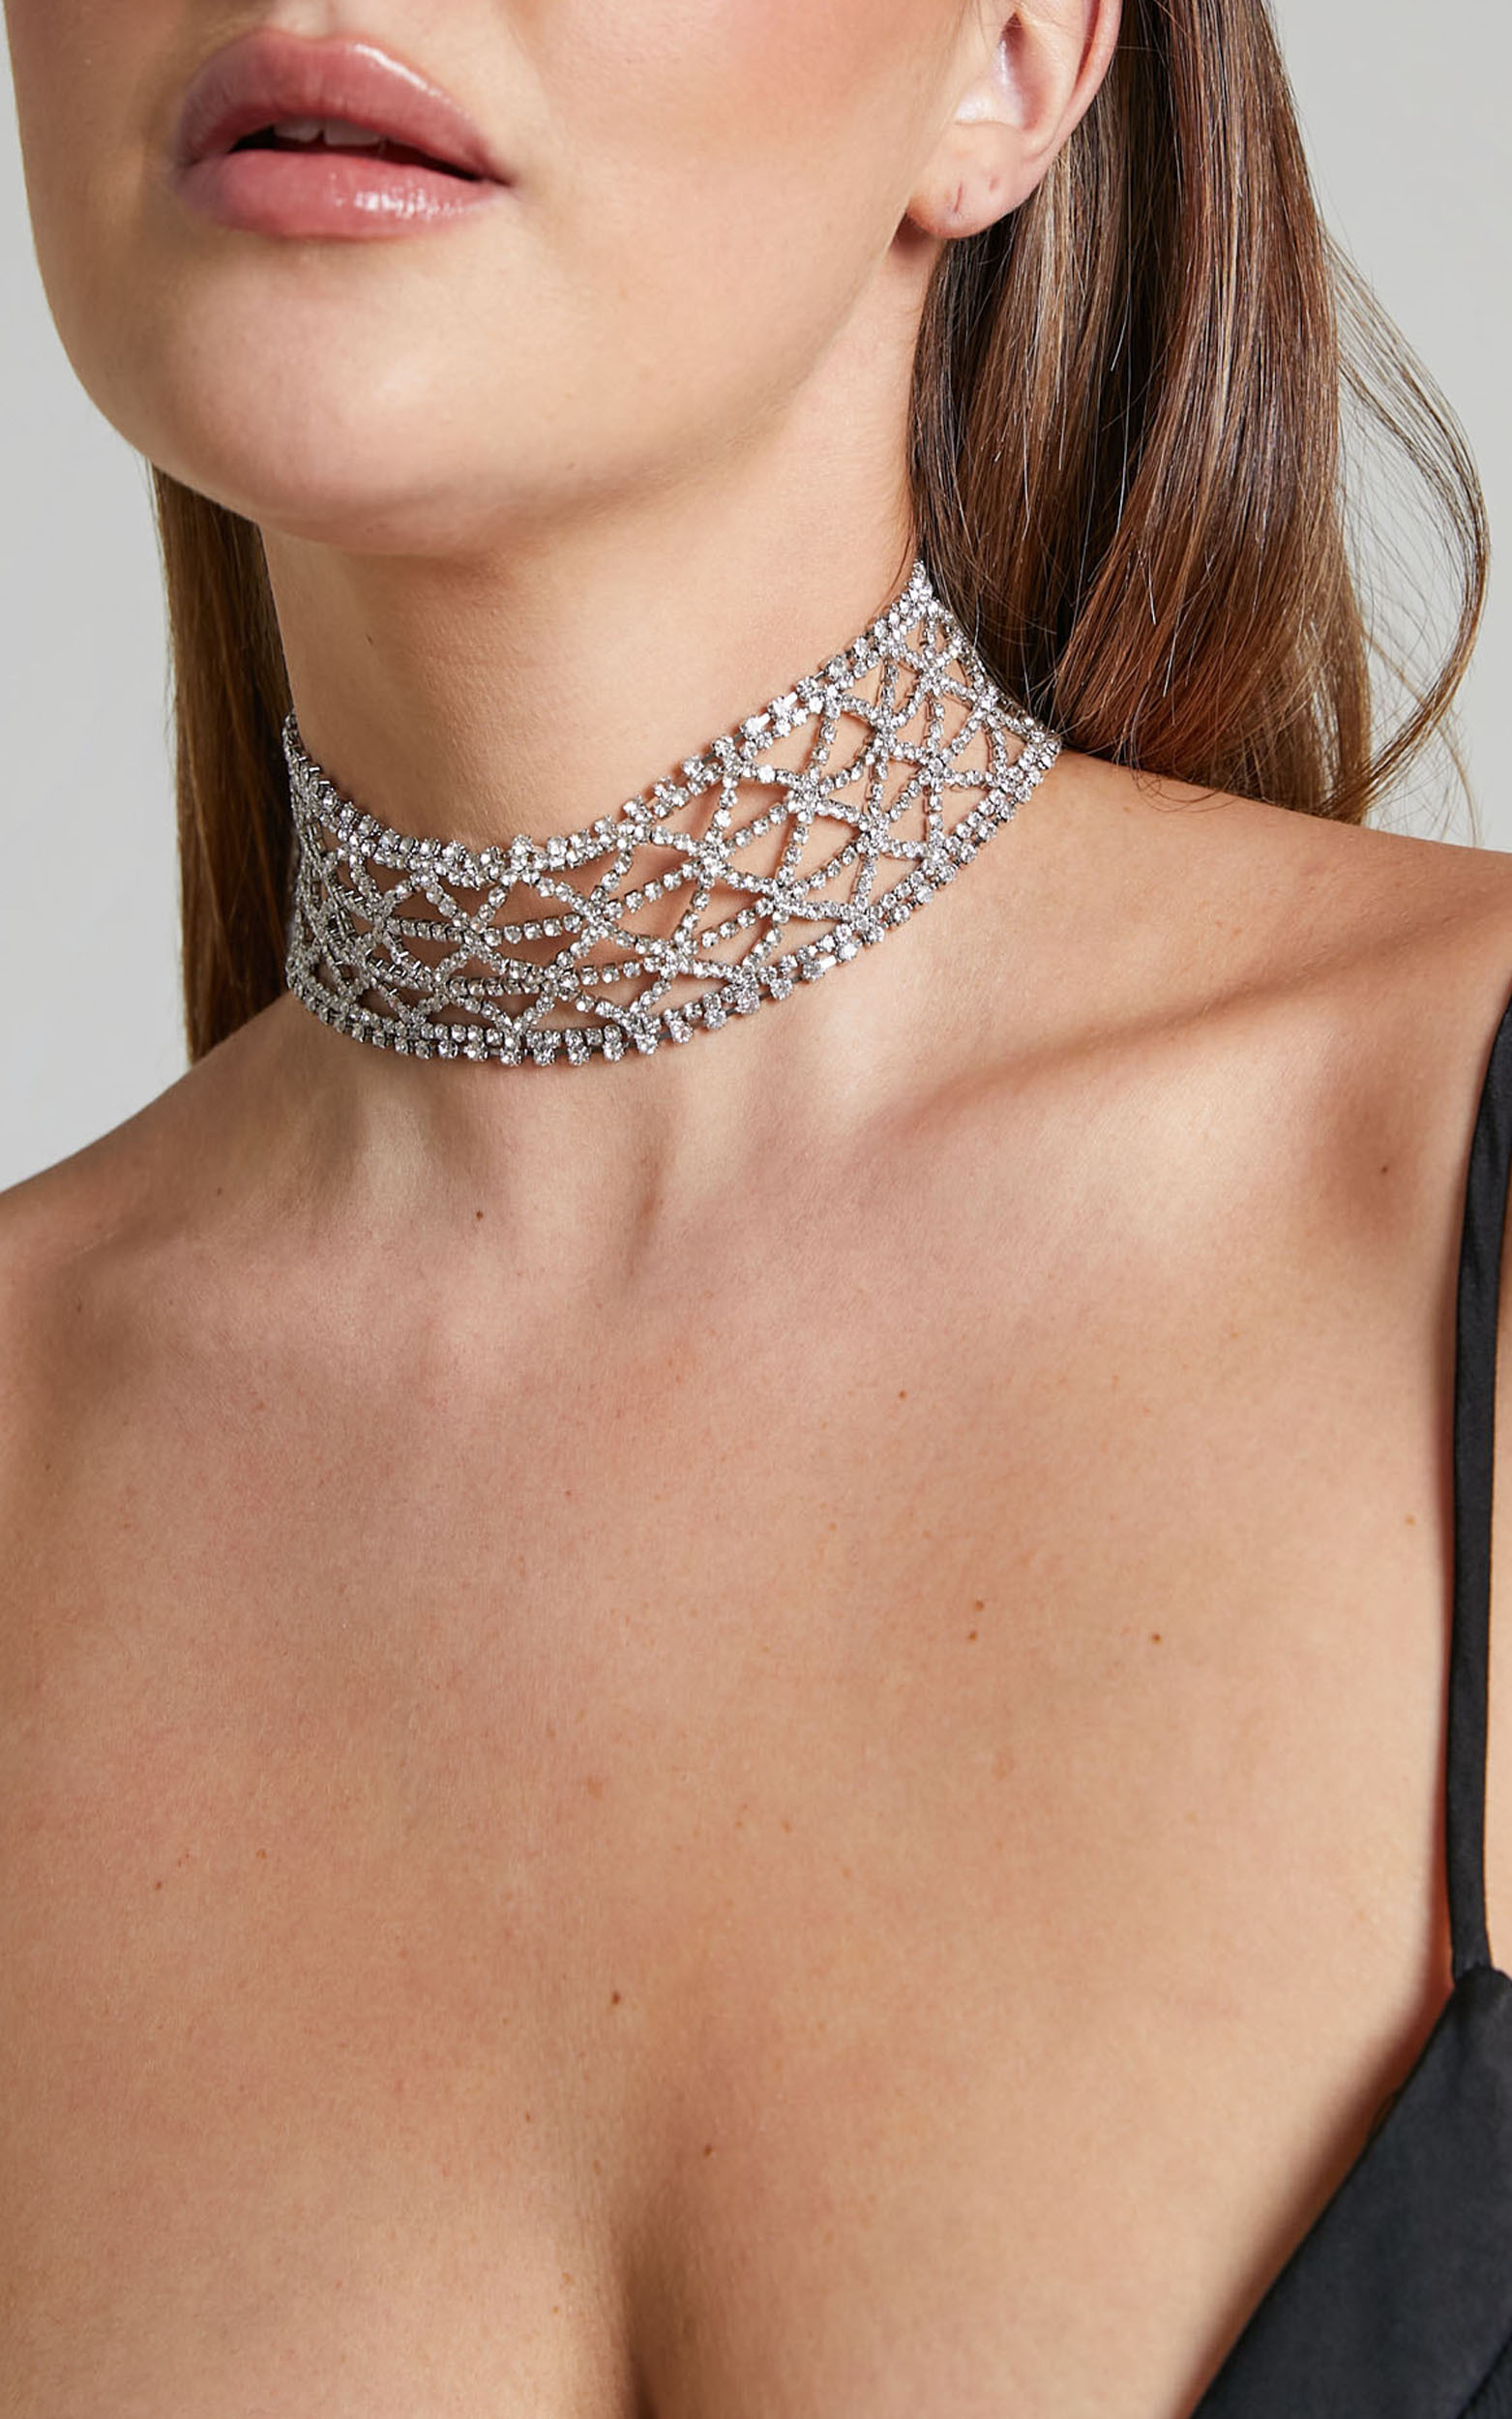 Helena Diamante Choker in Silver - NoSize, SLV1, hi-res image number null